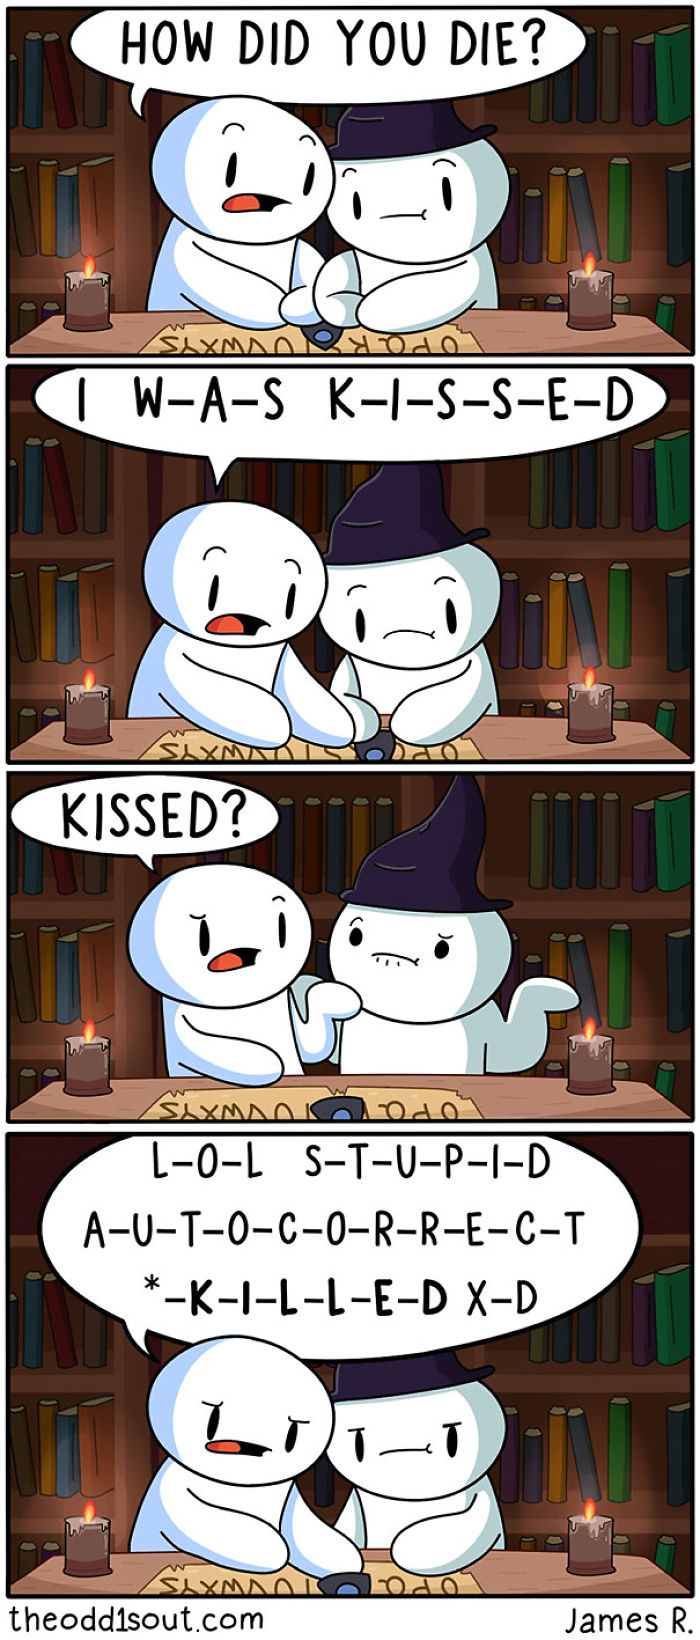 25+ Comics By Theodd1sout That Have The Most Unexpected Endings | DeMilked